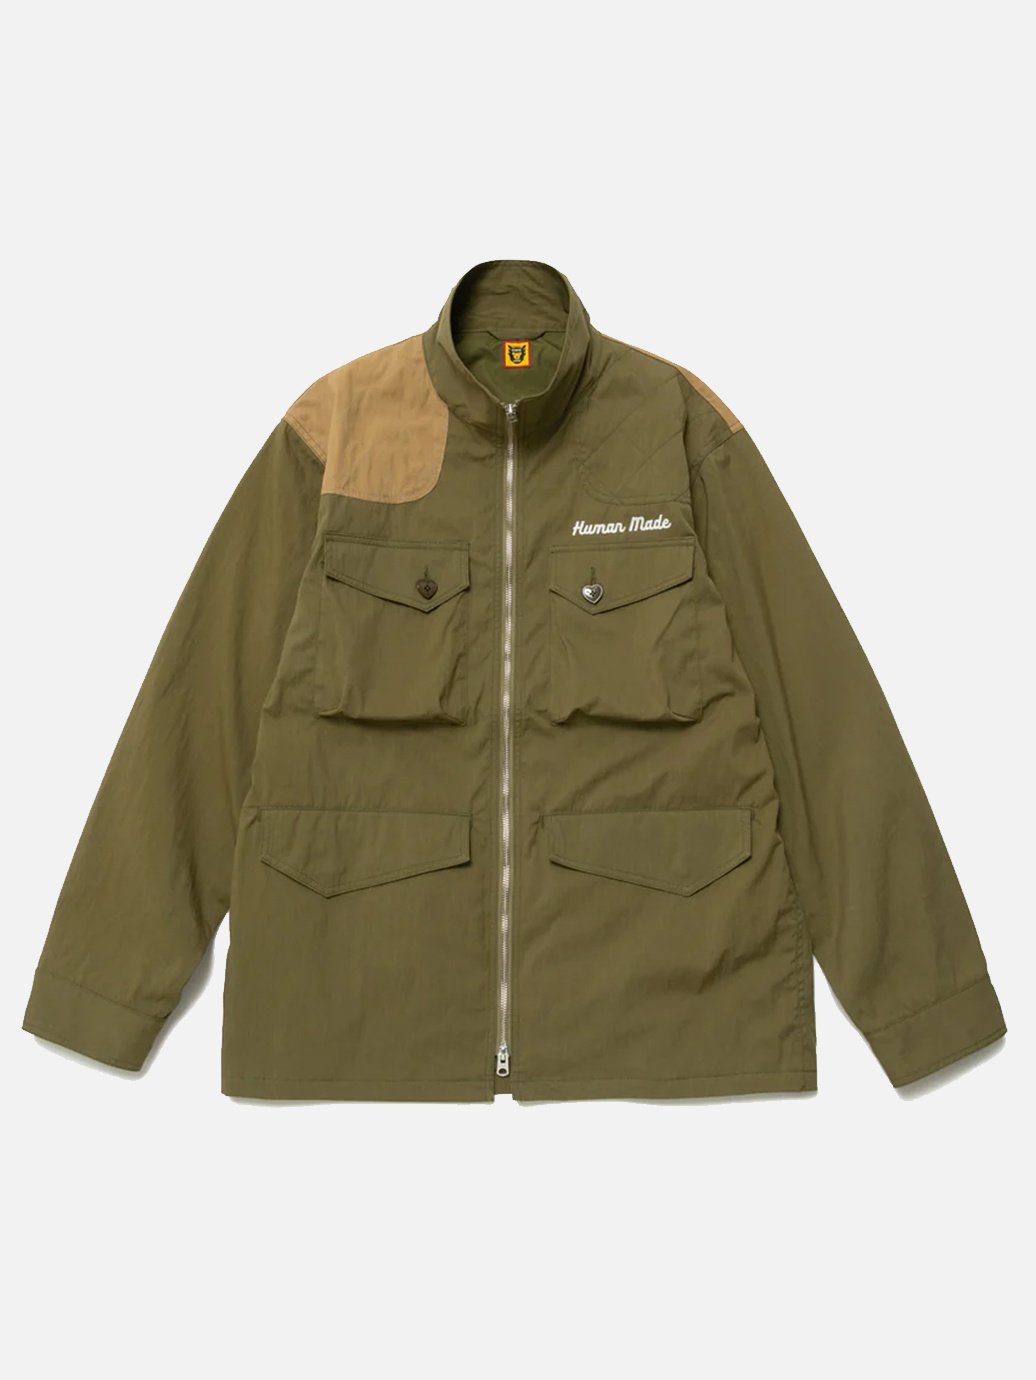 Human Made Hunting Jacket SS23 Olive Drab – OALLERY